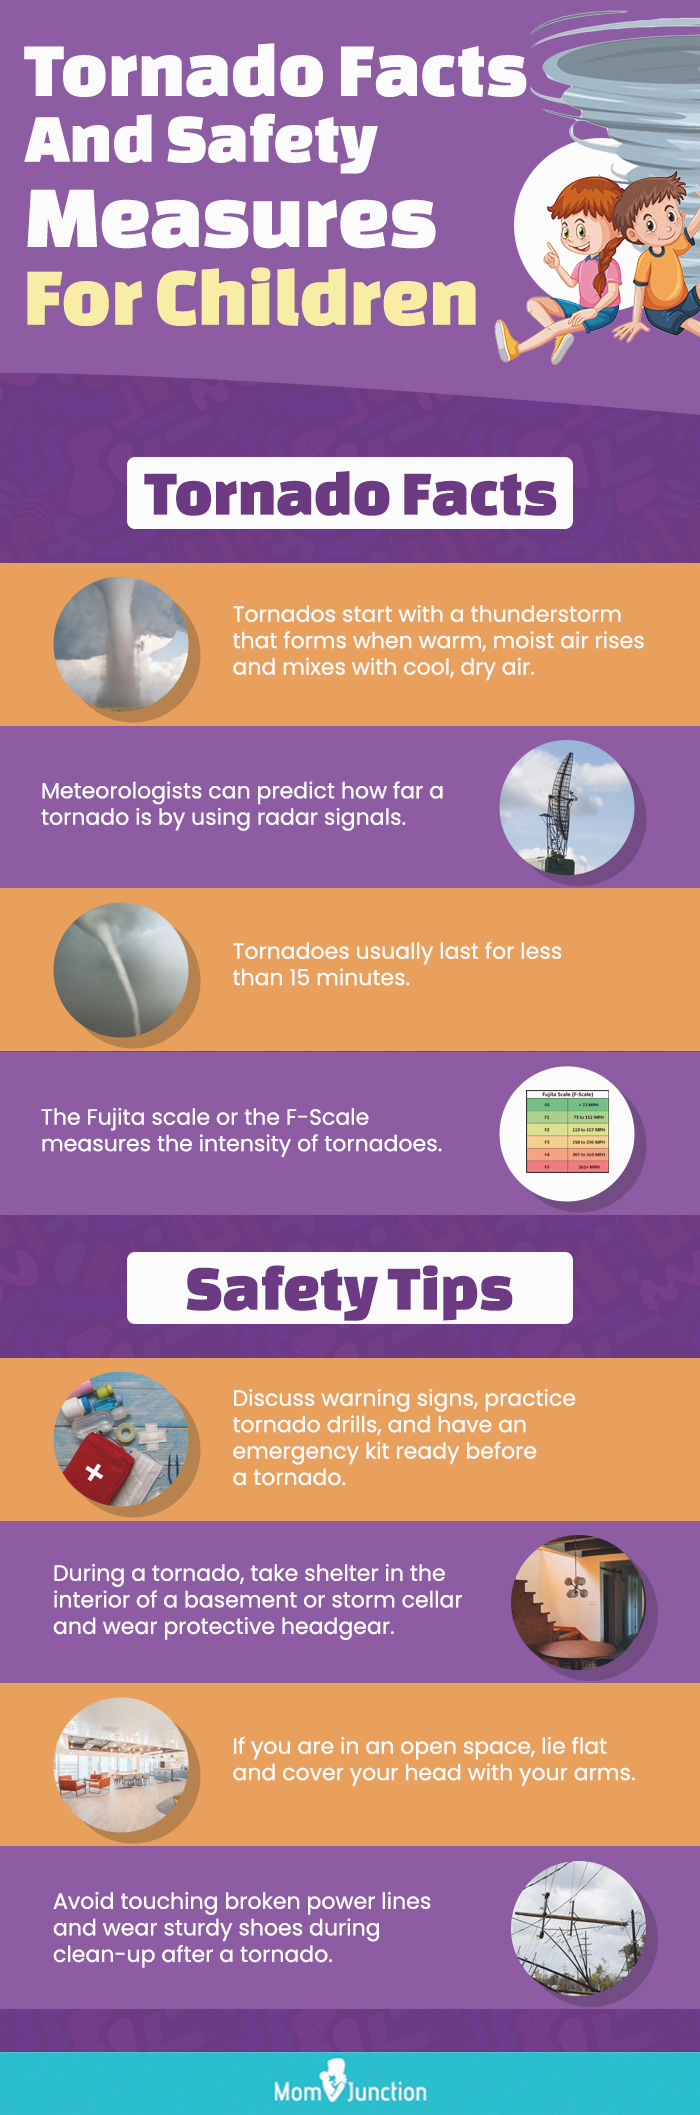 tornado facts for children and safety measures(infographic)